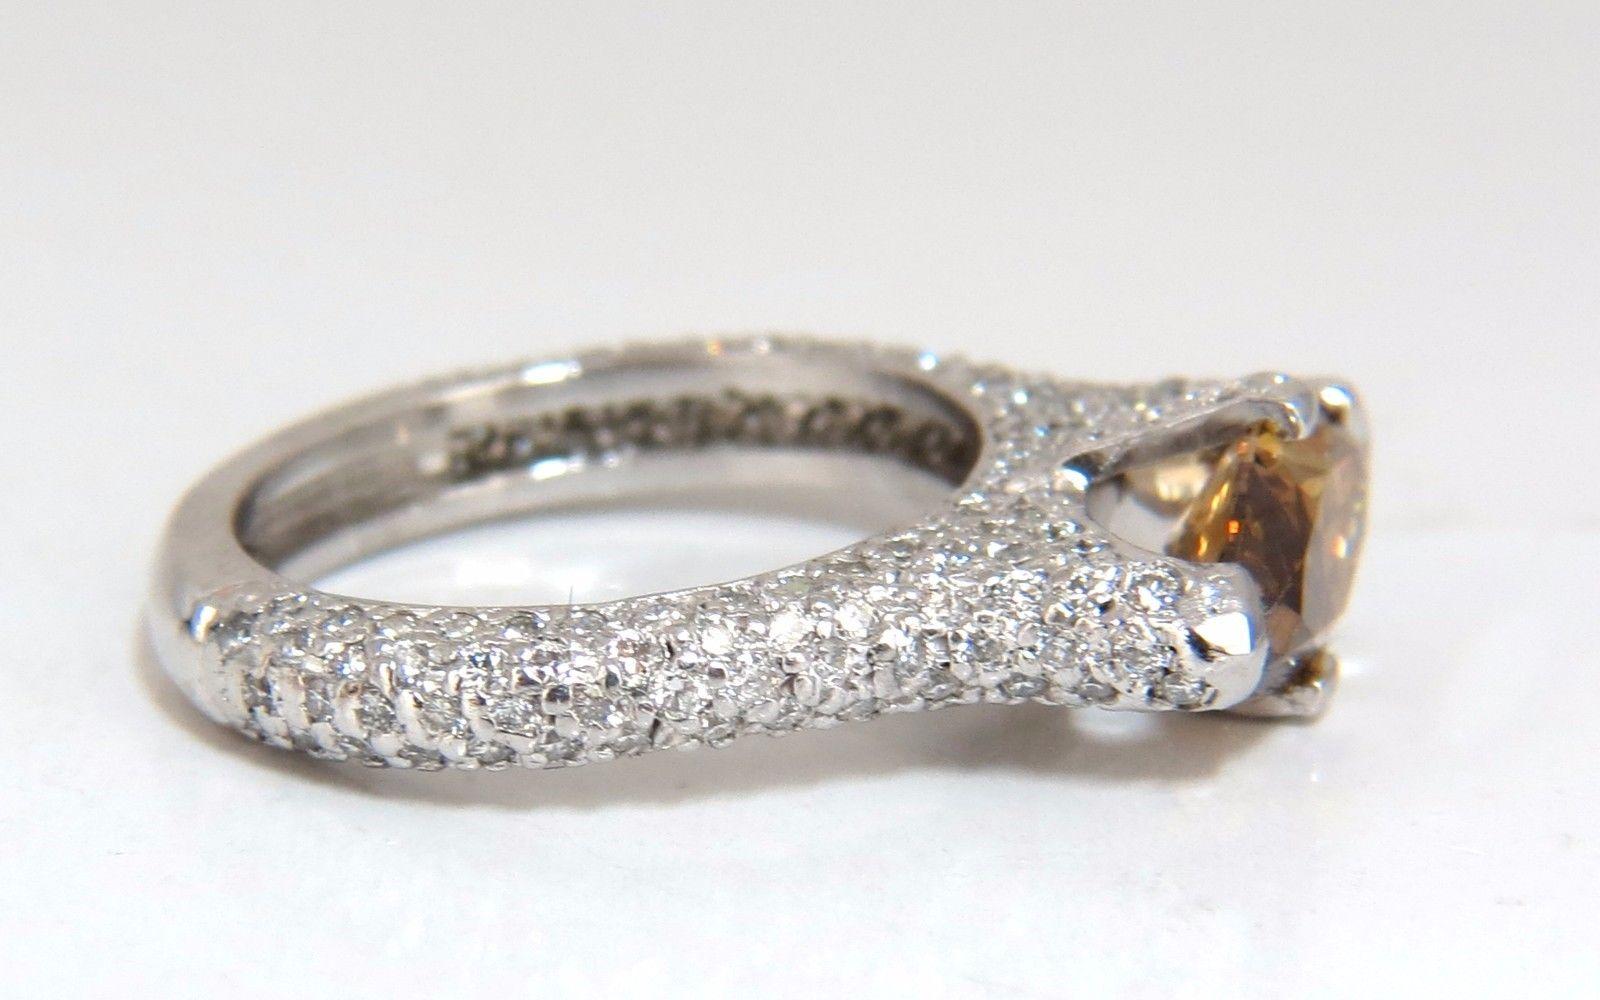 GIA Certified 2.46 Carat Fancy Dark Yellow Brown Diamond Ring Platinum In New Condition For Sale In New York, NY